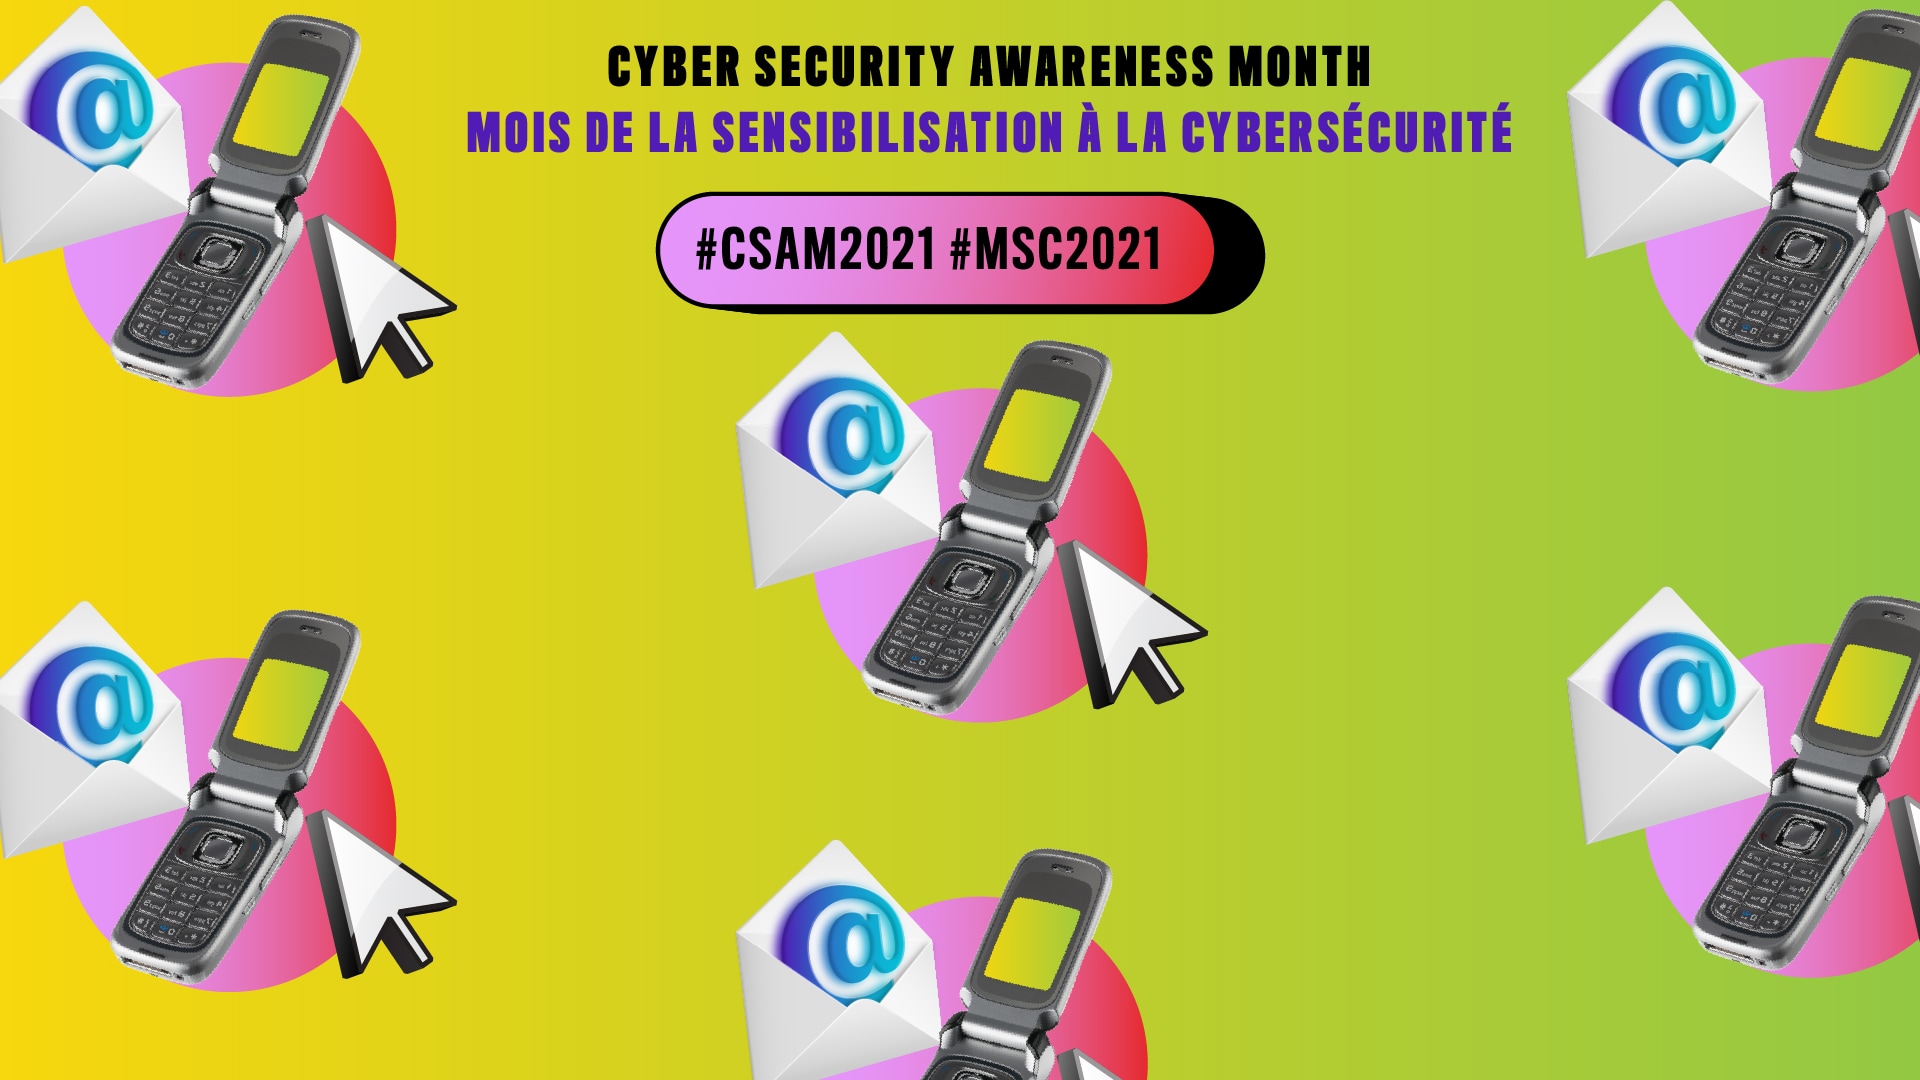 Yellow bleeding to green background with flip phones in pink circles with cursor arrows and open envelopes containing @. Text: Cyber Security Awareness Month, Mois de la sensibilisation à la cybersécurité, #CSAM2021 #MSC2021